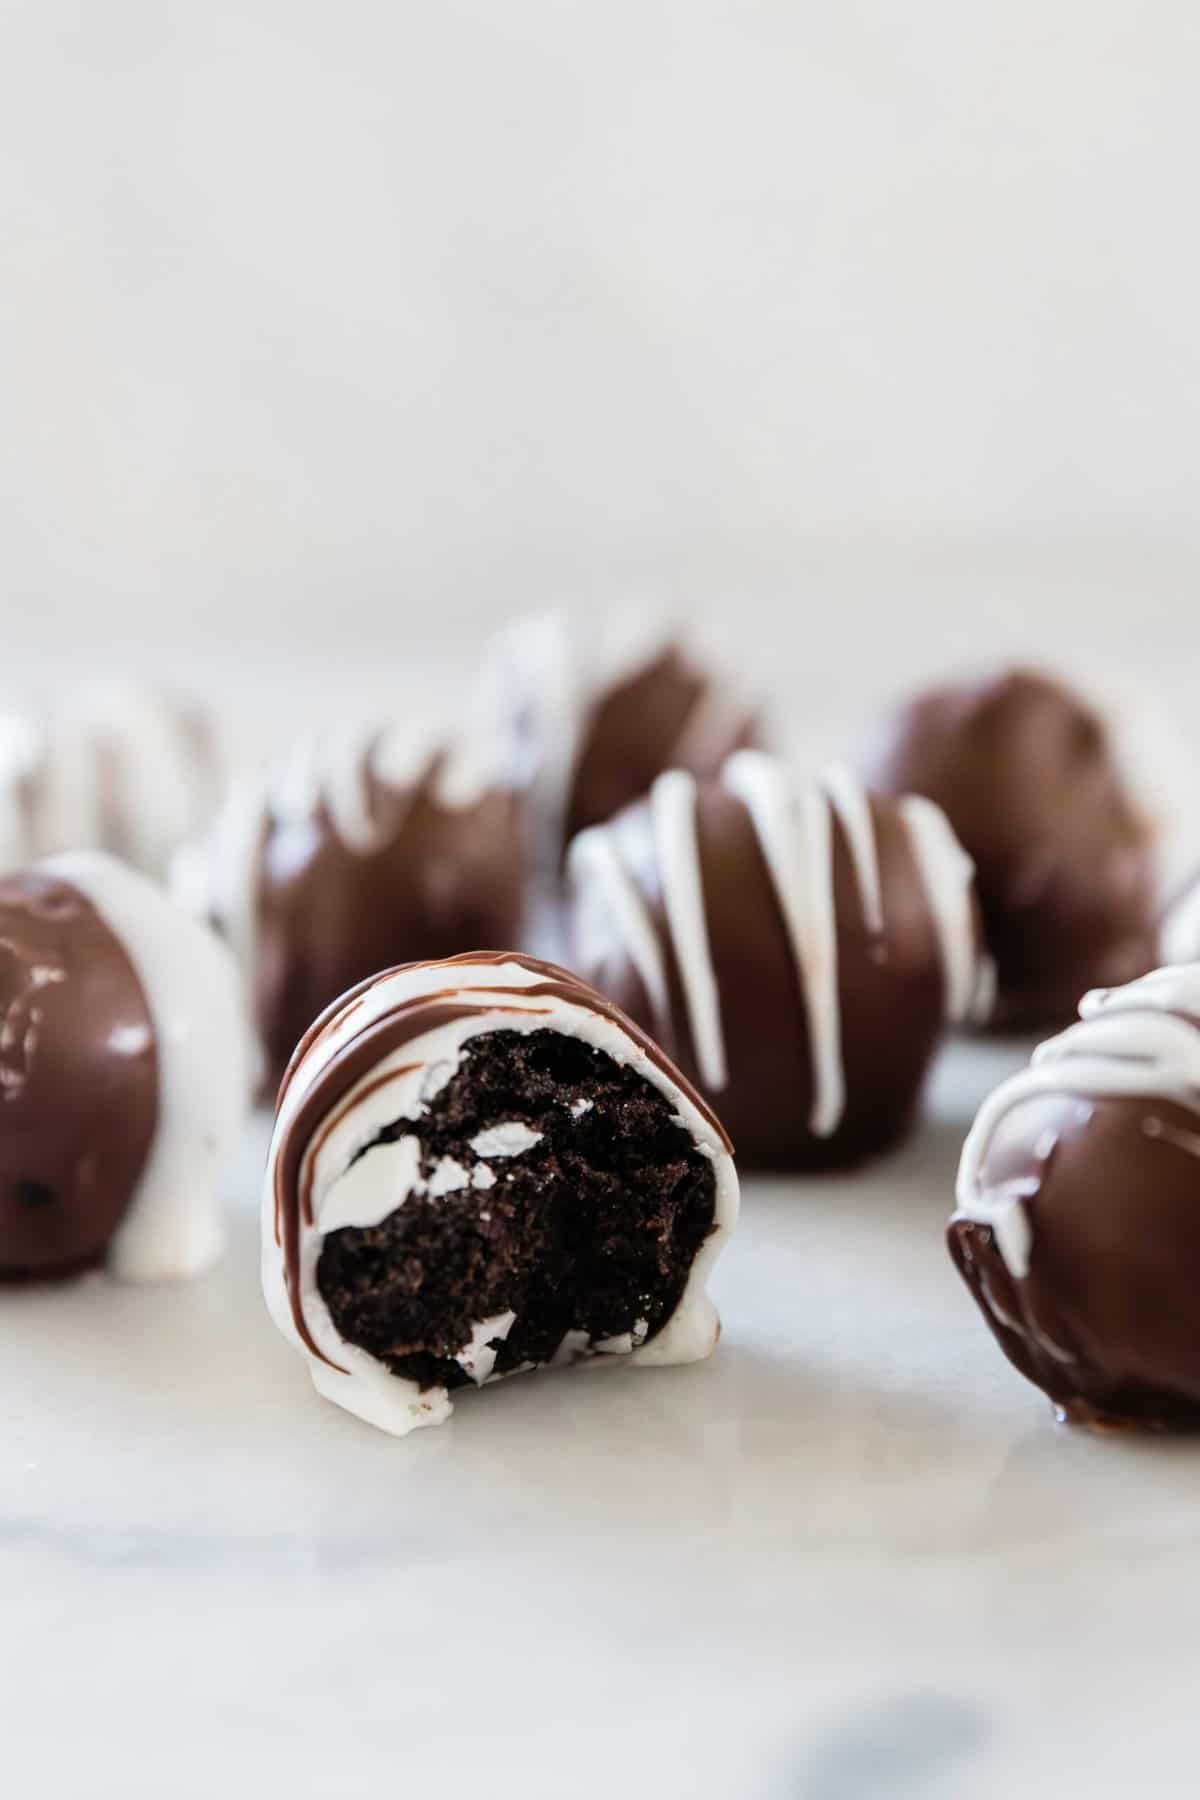 A close up of an Oreo truffle with a bite missing.